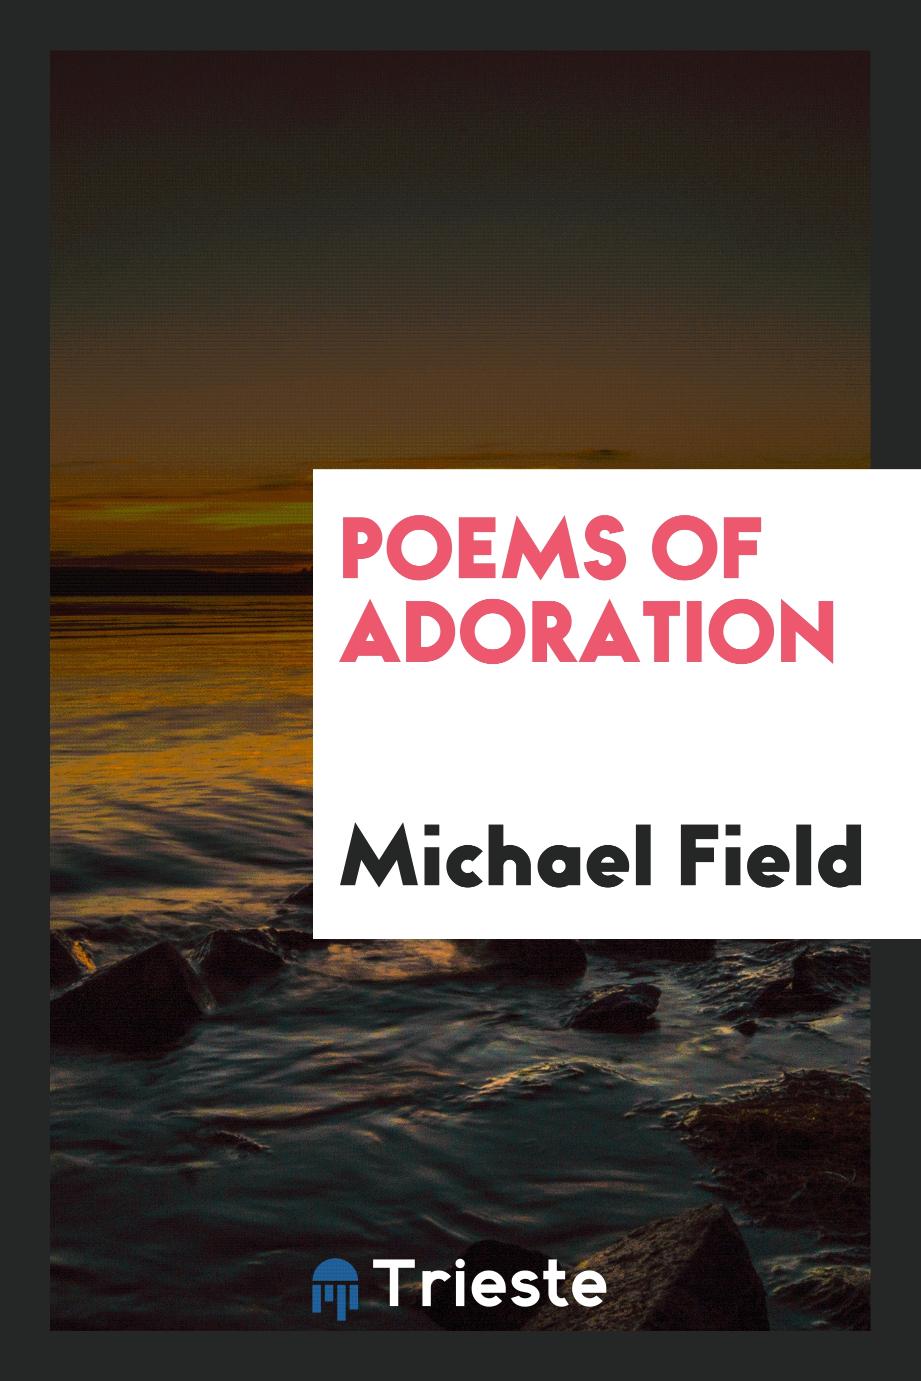 Poems of adoration